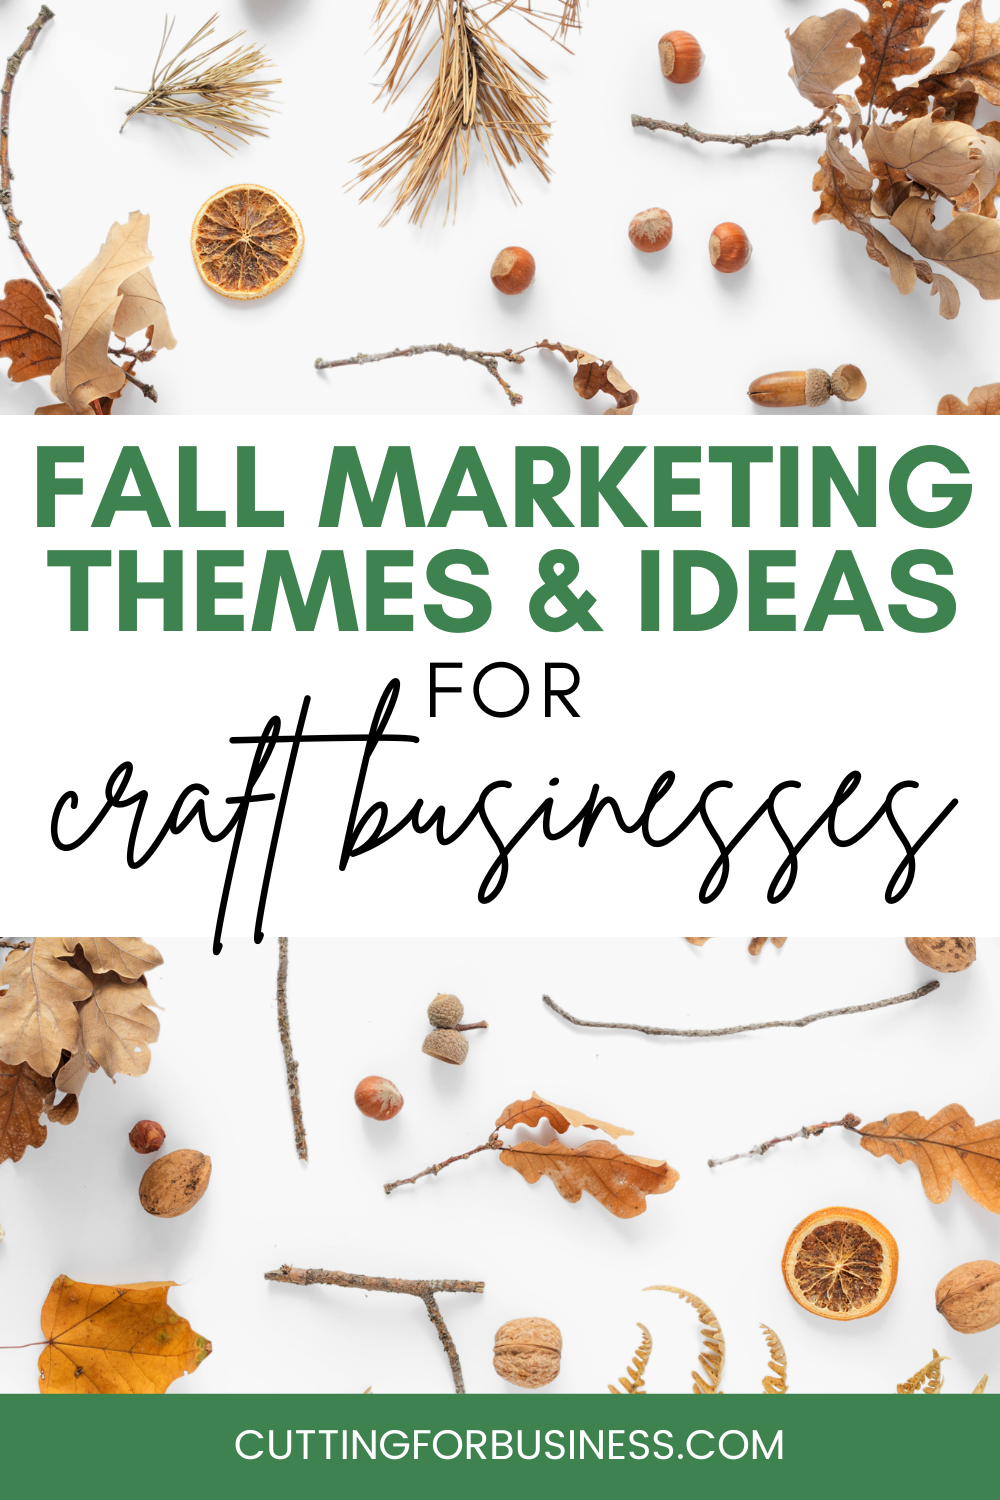 Fall Marketing Themes for Craft Businesses - by cuttingforbusiness.com.